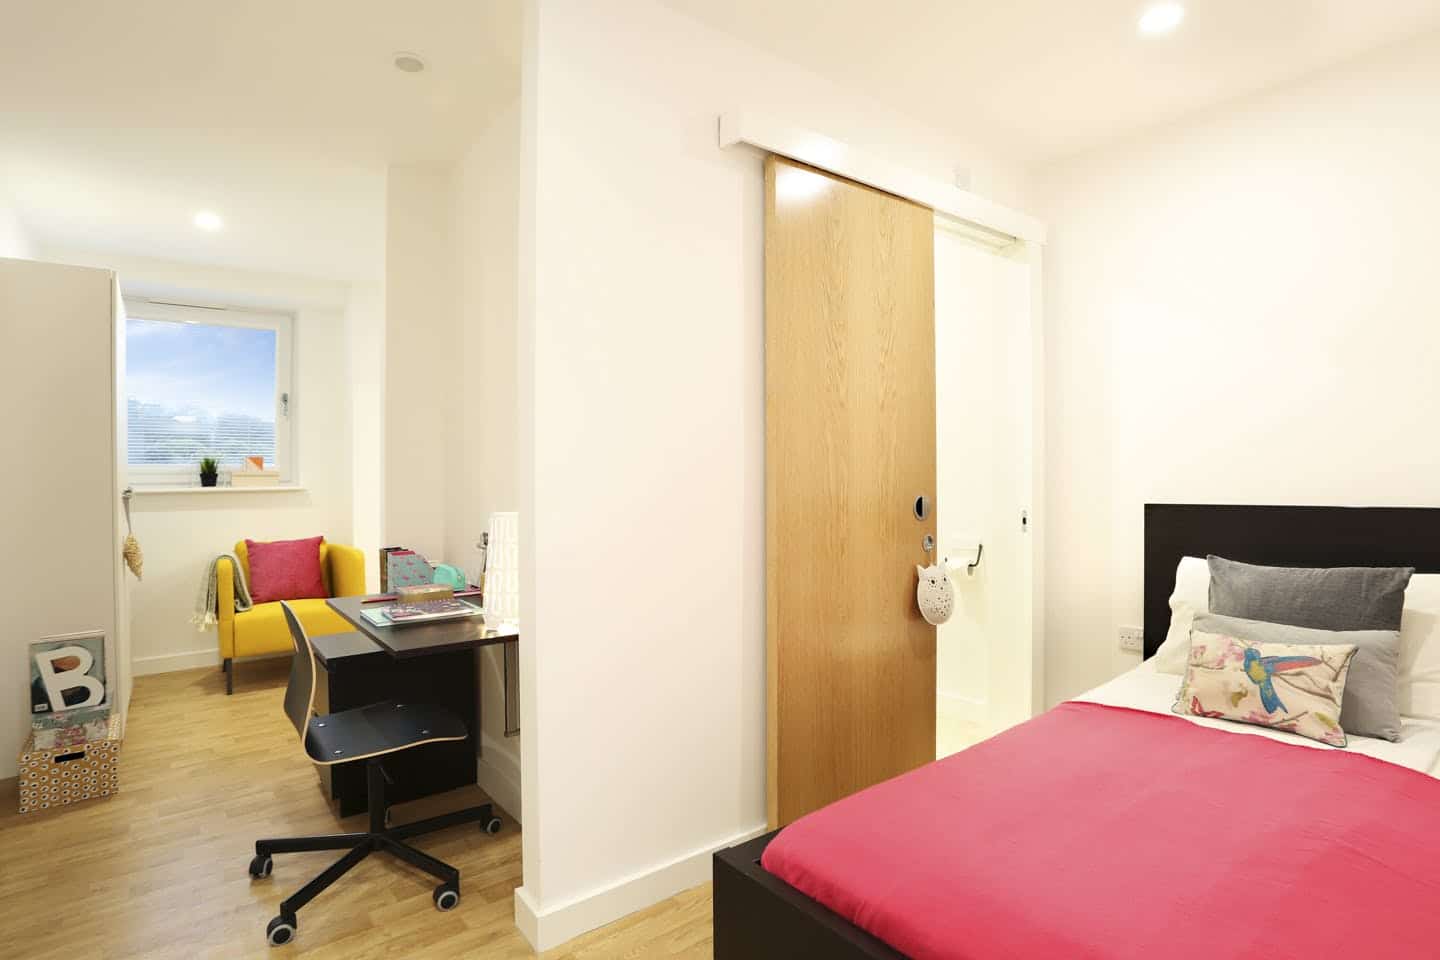 The One Month Long Student Accommodation Search